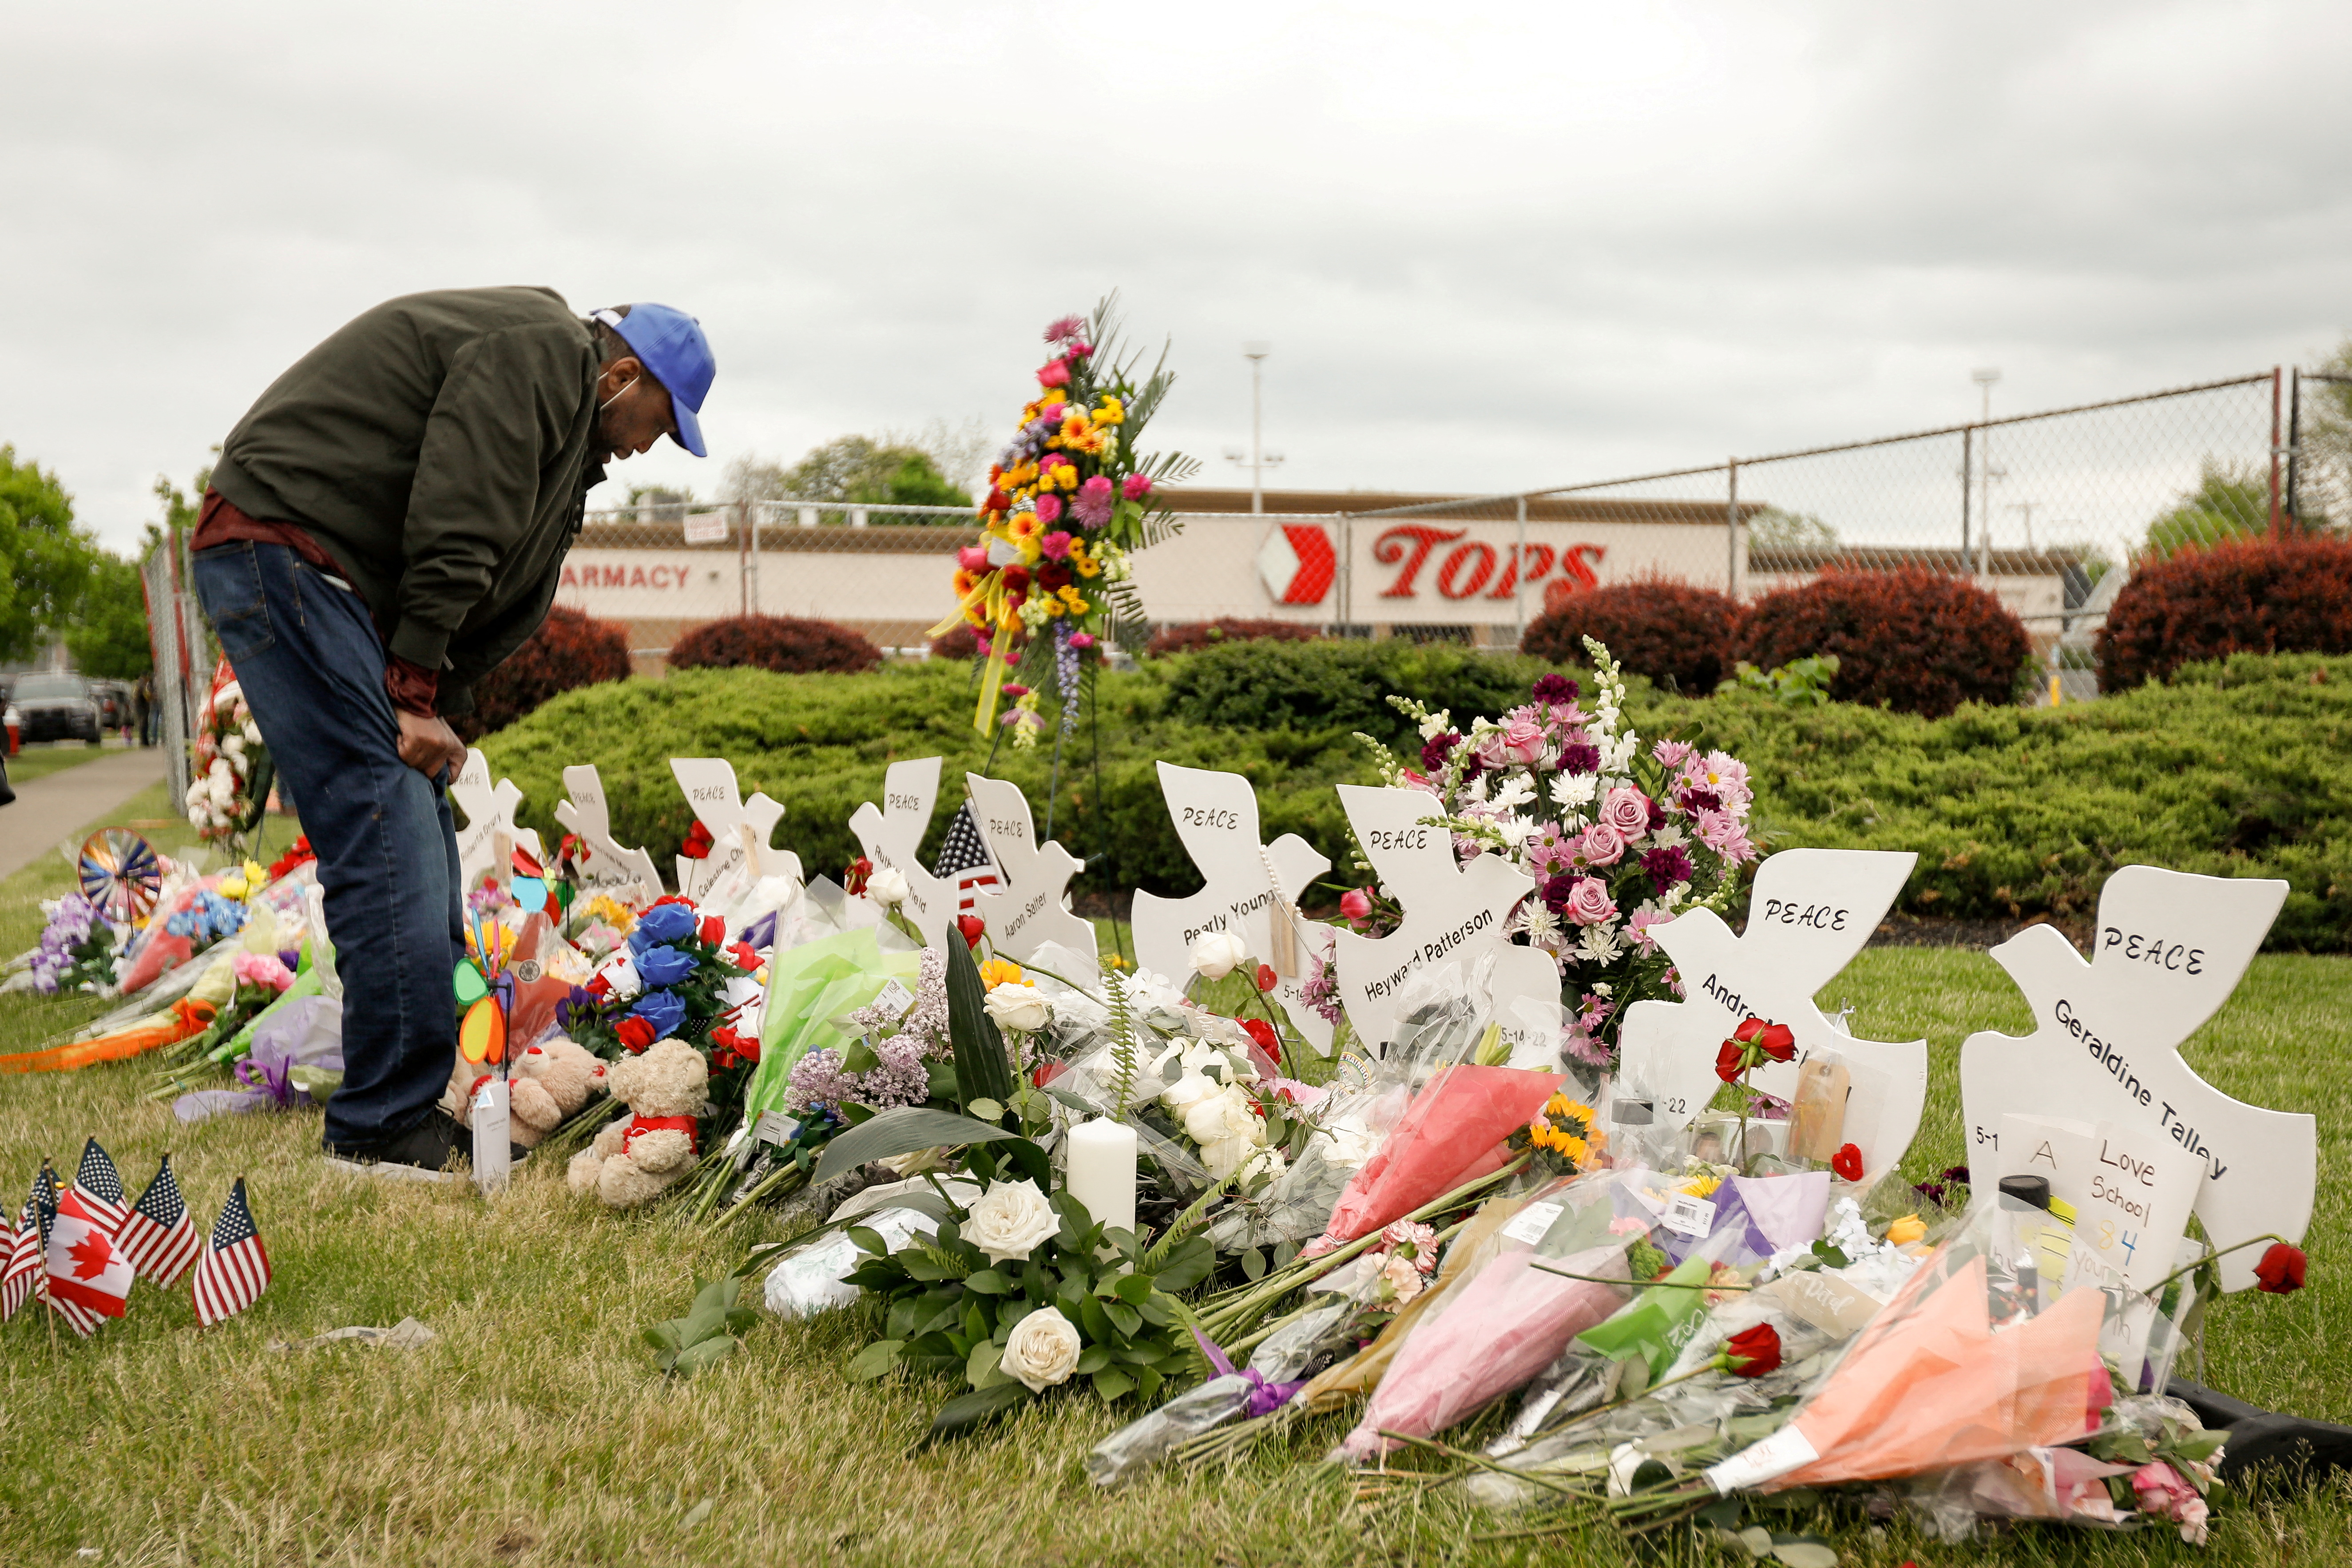 Man mourns at a memorial at the scene of a weekend shooting at a Tops supermarket in Buffalo, New York